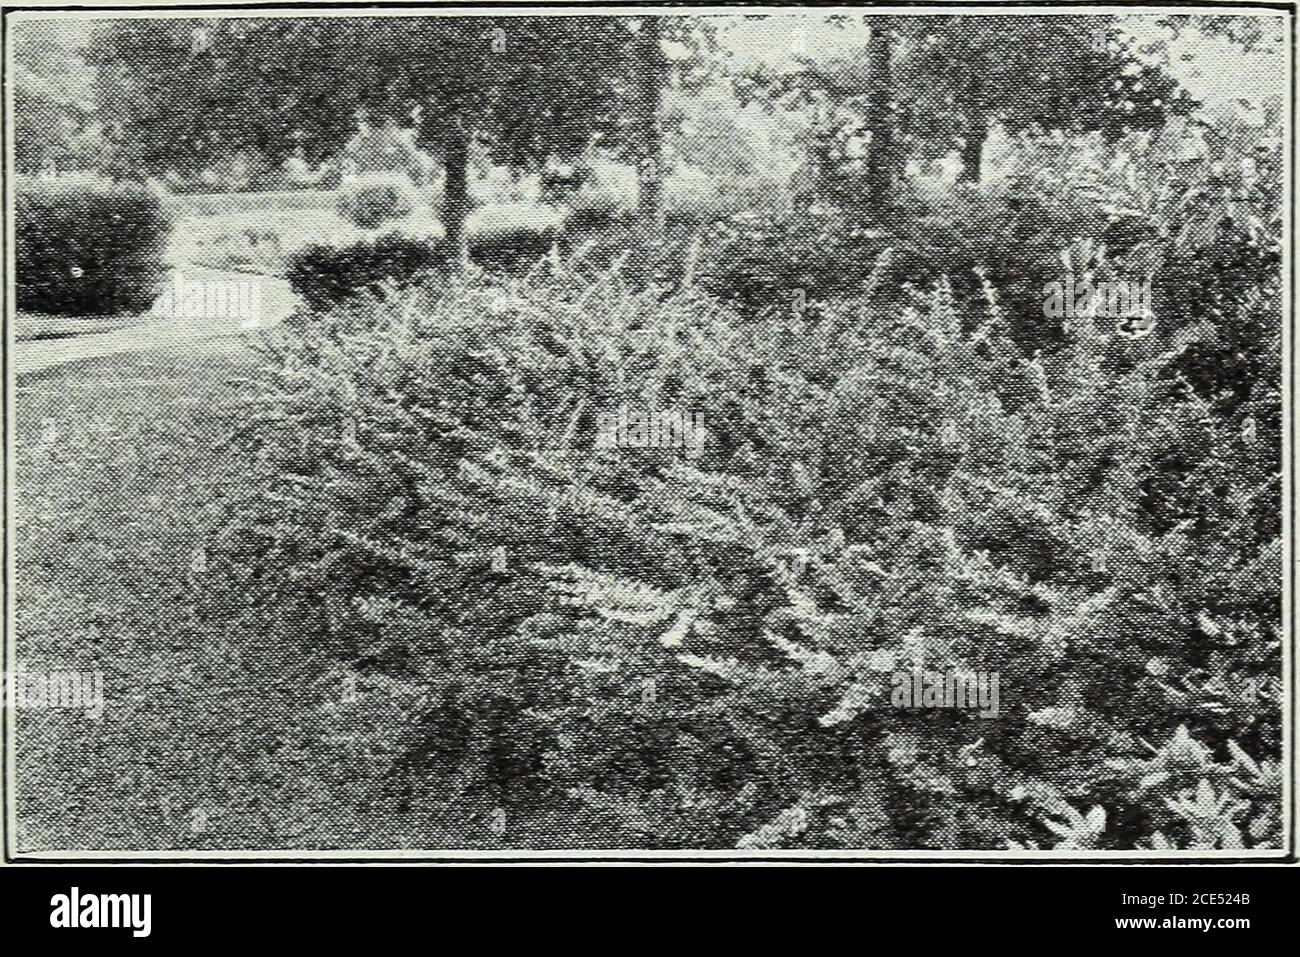 . Harrisons' nurseries special reduced prices : nurserymen - orchardists . Dougrlas* Spruce (Pseudotsuga Douglasii). 4 to 5 feet 4.00 35.00 5 to 6 feet 5.00 45.00 6 to 7 feet 6.00 65.00 Rosters Blue Spruce. (Picea Pungens Glauca Kosteriana). 2 to 3 feet $ 4.00 $30.00 3 to 4 feet... 5.00 40,00 4 to 5 feet 6.00 50.00 5 to 6 feet 8 00 70.00 6 to 7 feet Specimens 12.00 100.00 7 to 8 feet Specimens 14.00 8 to 10 feet Specimens 16.00 Norway Spruce (P Excelsa). Each 10 100 1,000 2 to 3 feet $1.50 $12.50 $100.00 $ 900.00 3 to 4 feet 2.00 17.50 150.00 1,250.00 4 to 5 feet 2.50 22.50 200.00 1,750.00 5 t Stock Photo